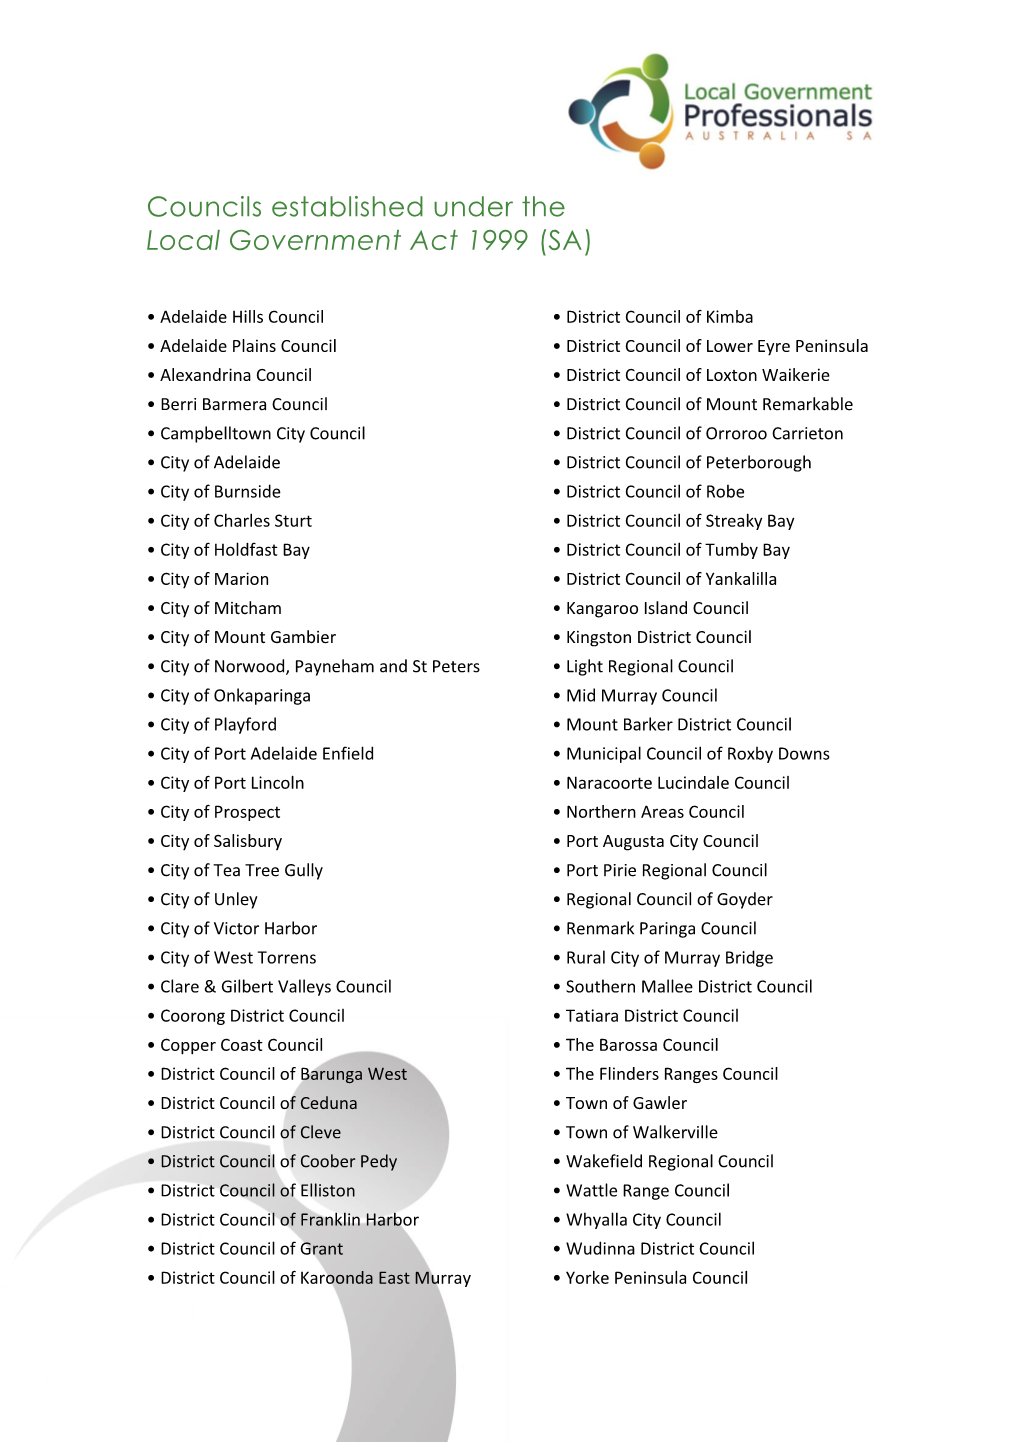 Councils Established Under the Local Government Act 1999 (SA)